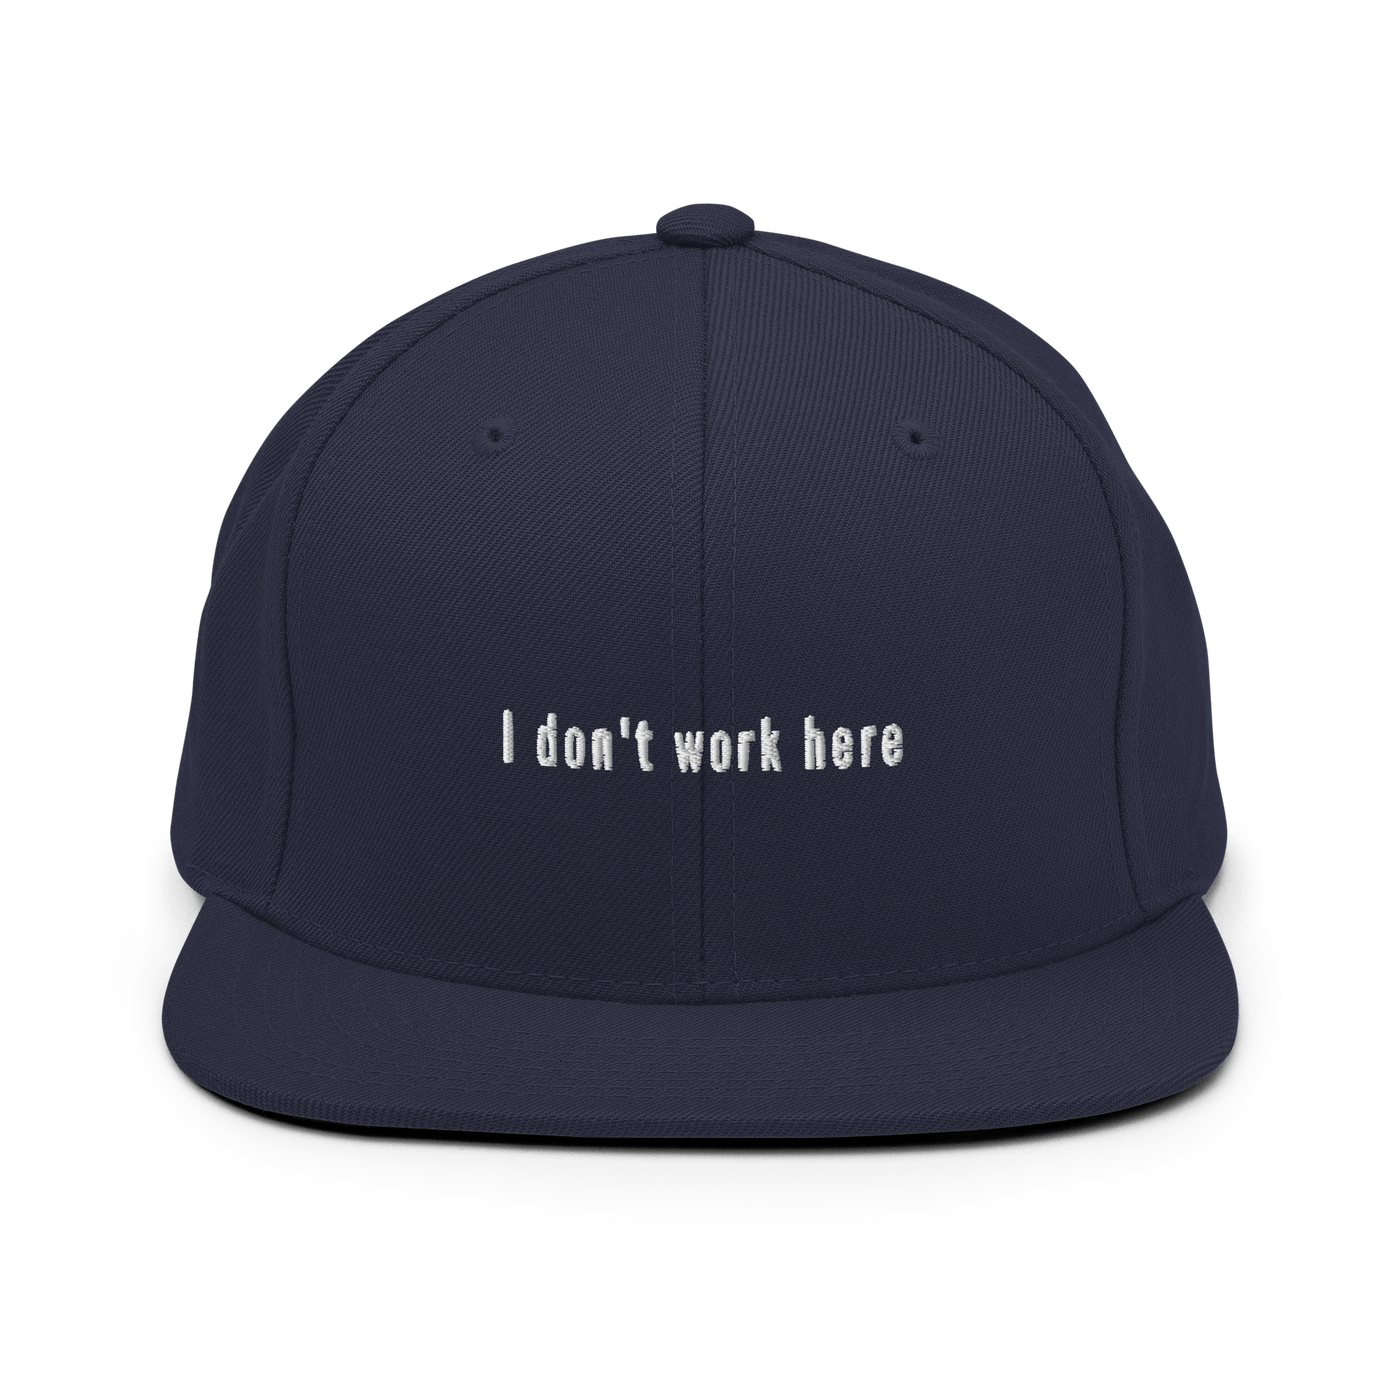 I don't work here Snapback Hat - Navy - - Just Another Cap Store